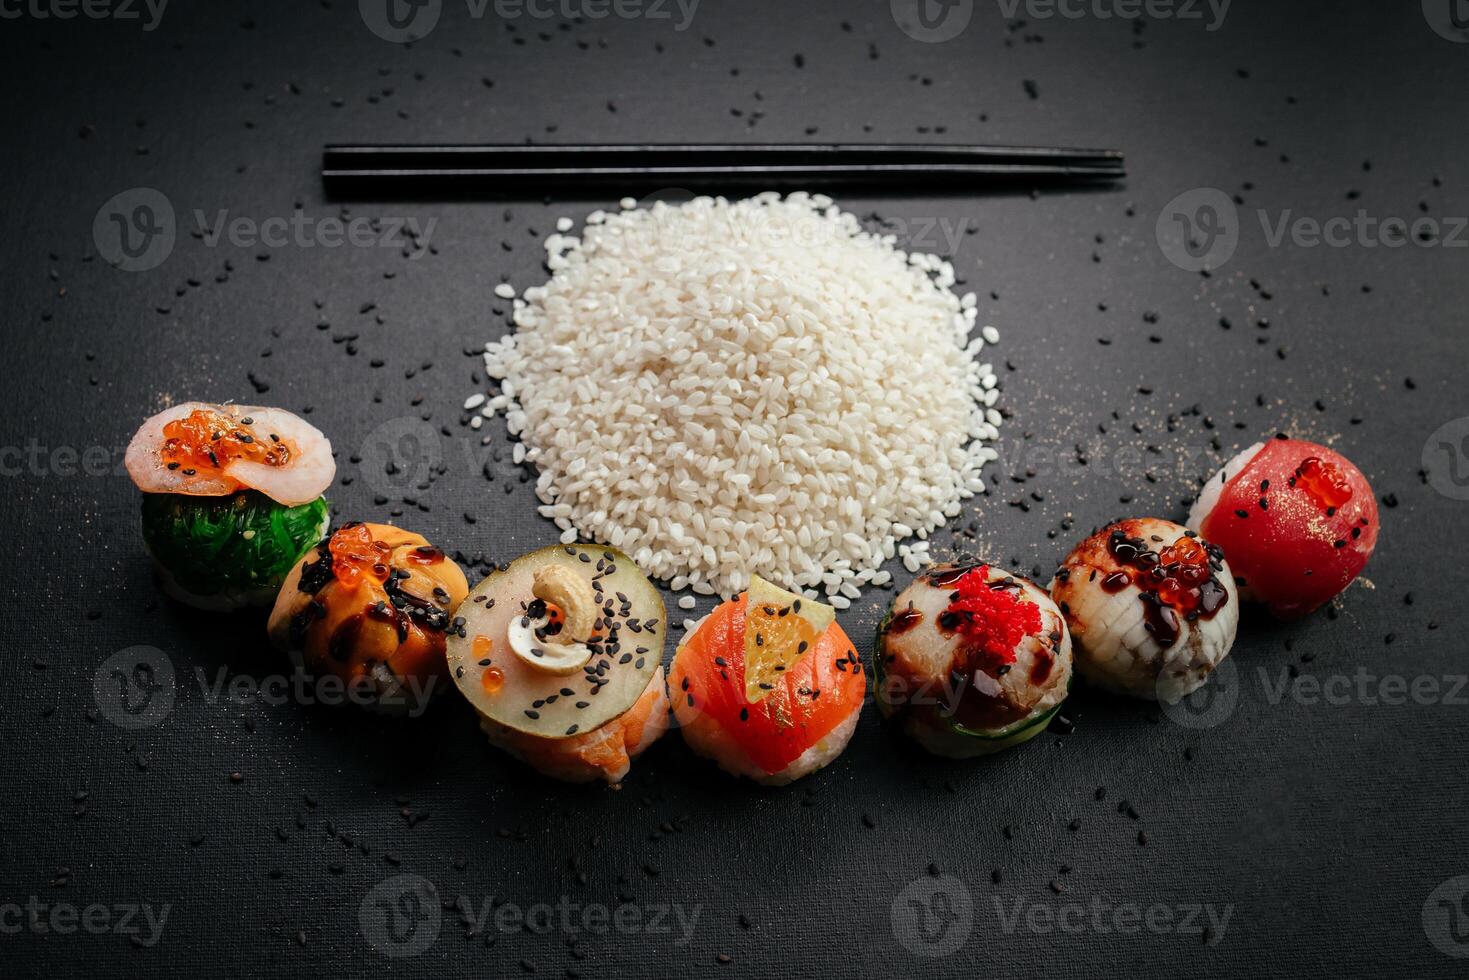 Elegance meets flavor as sushi varieties take their place on a black background, inviting connoisseurs to partake in a visual and gustatory feast at restaurant photo